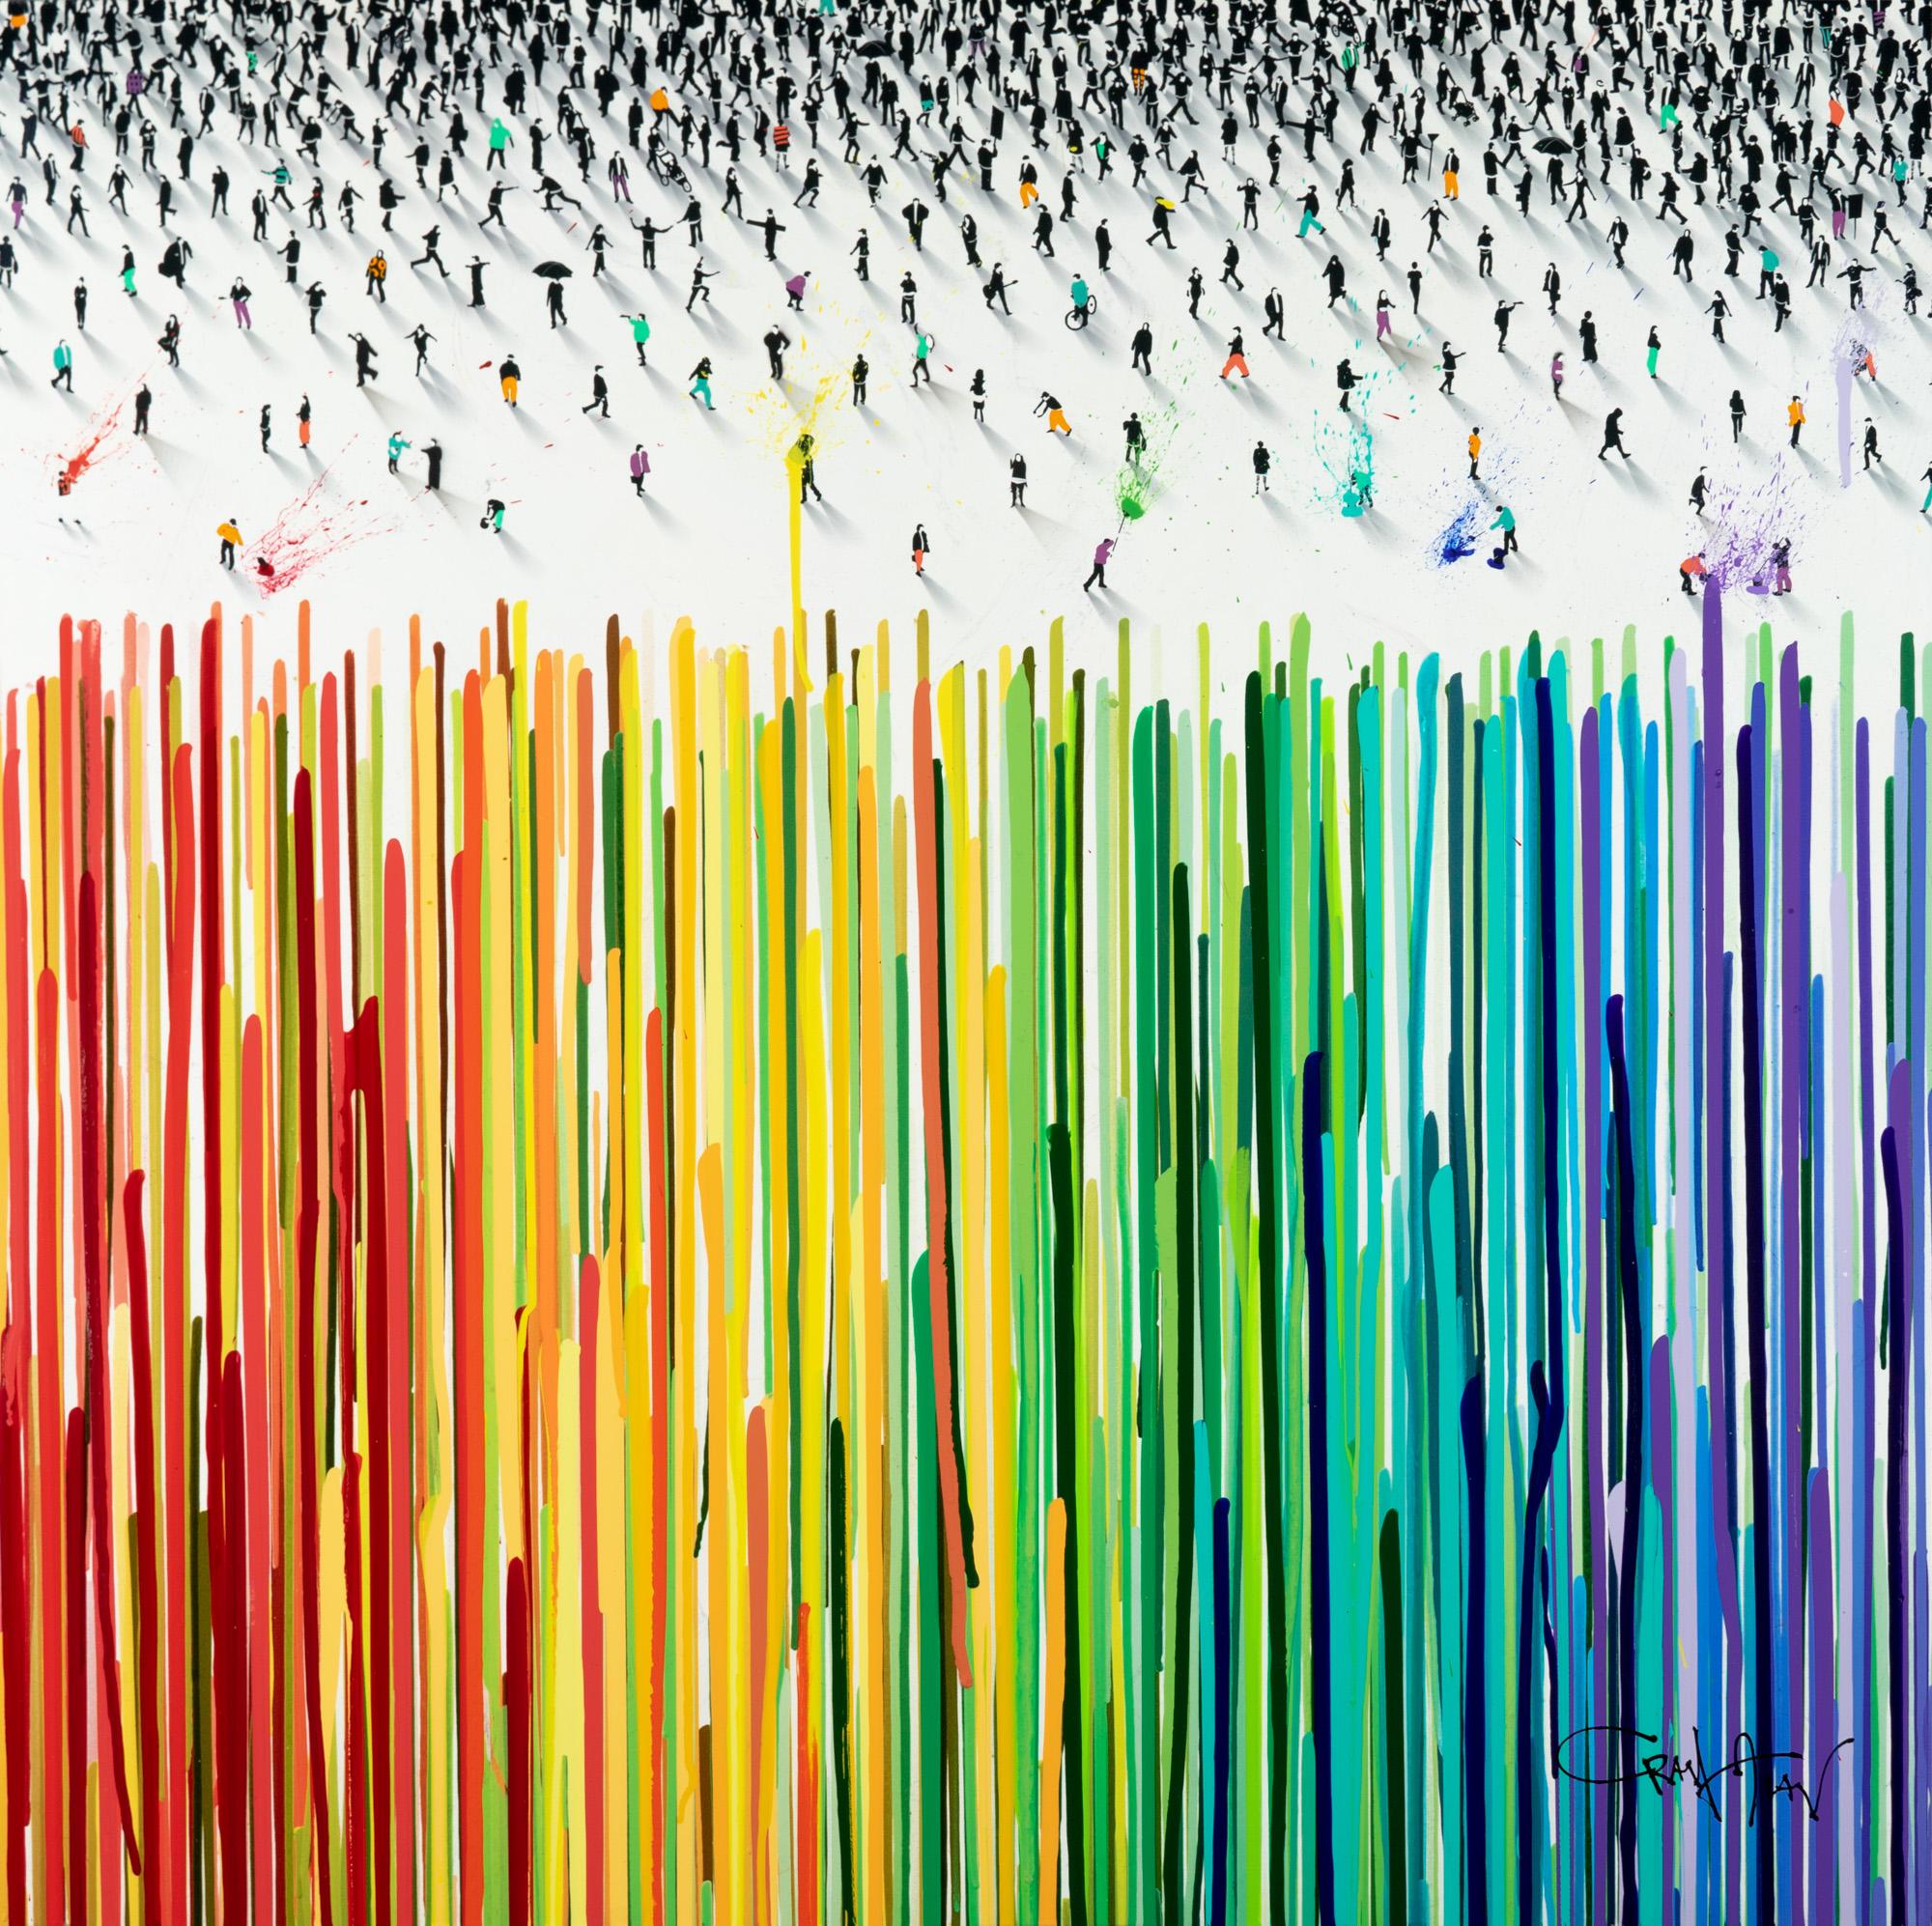 Craig Alan Abstract Painting - "Populus: Perspectrum II" Abstract Crowd Rainbow Mixed Media on Board Painting